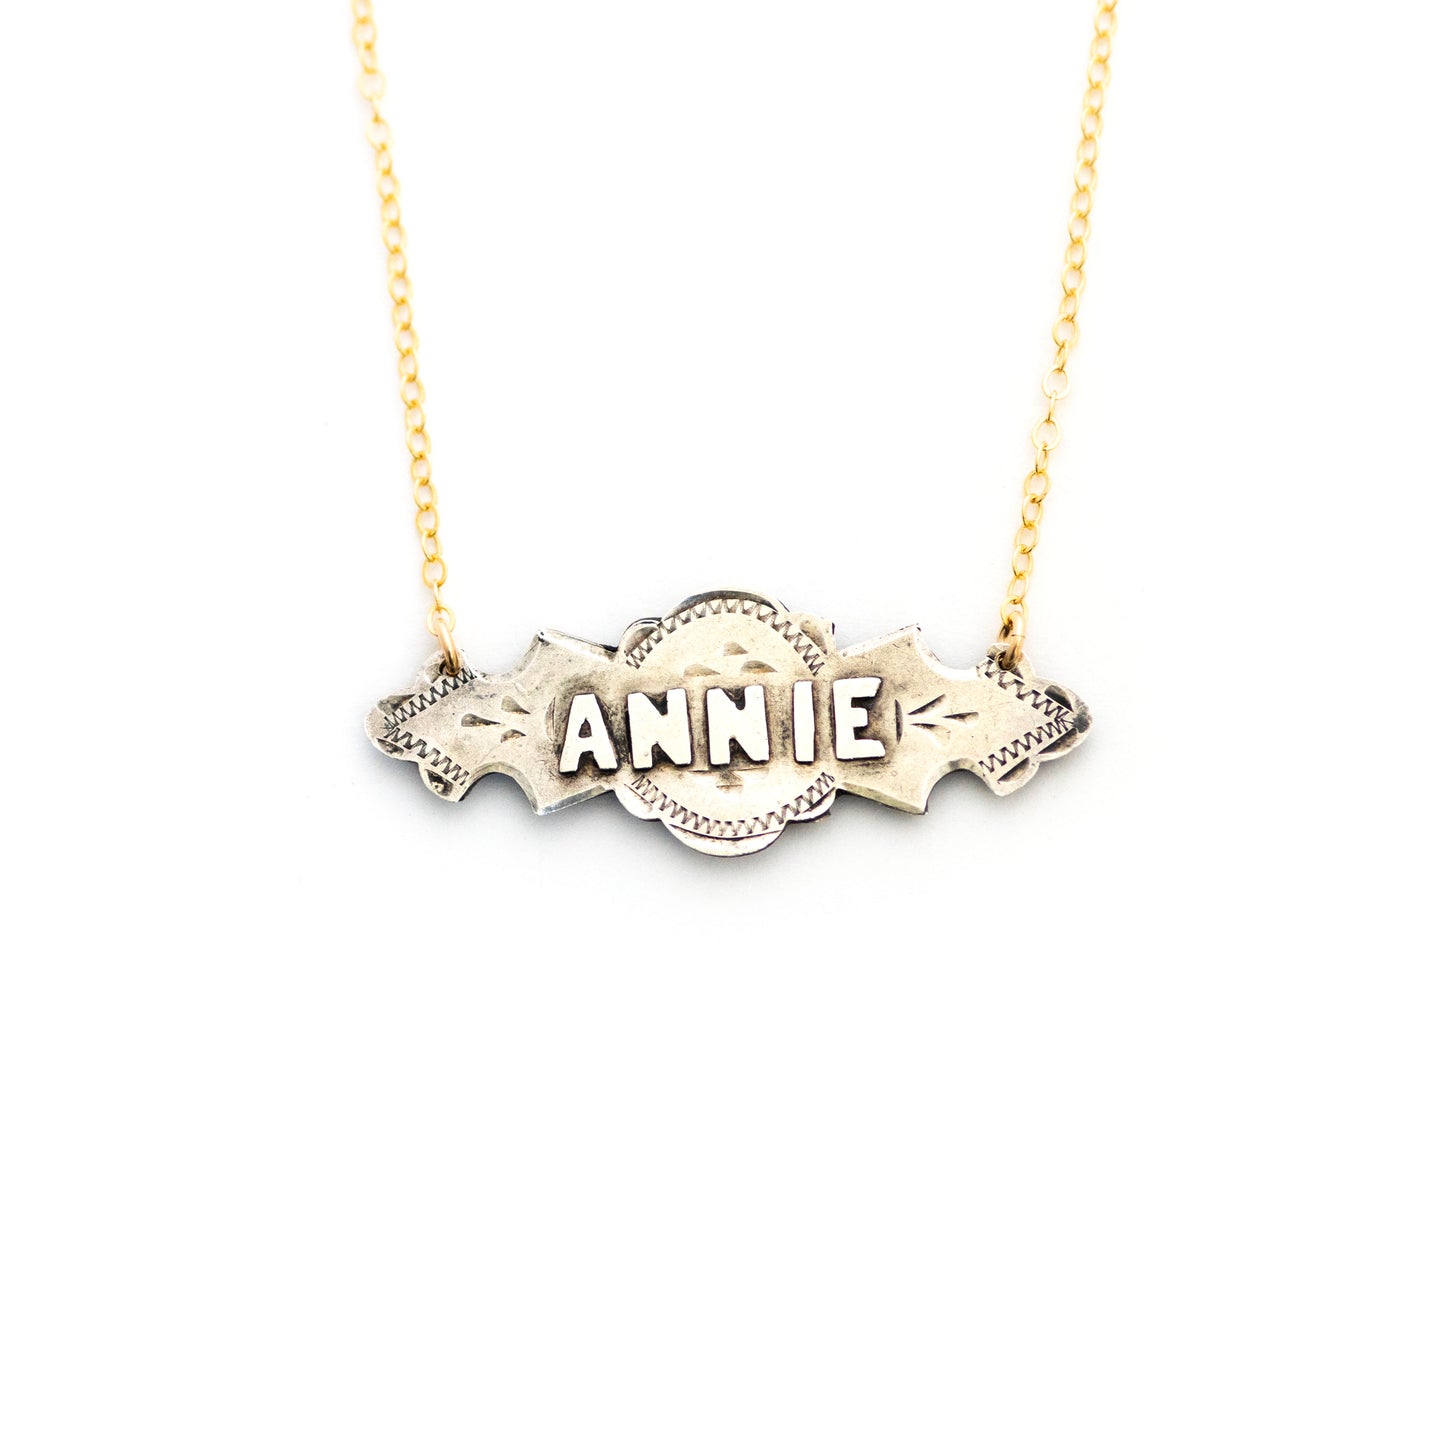 This one-of-a-kind conversion necklace is made up of:  Sterling silver Edwardian bar pin pendant from the early 1900s with hand engraved details and the name "ANNIE". 